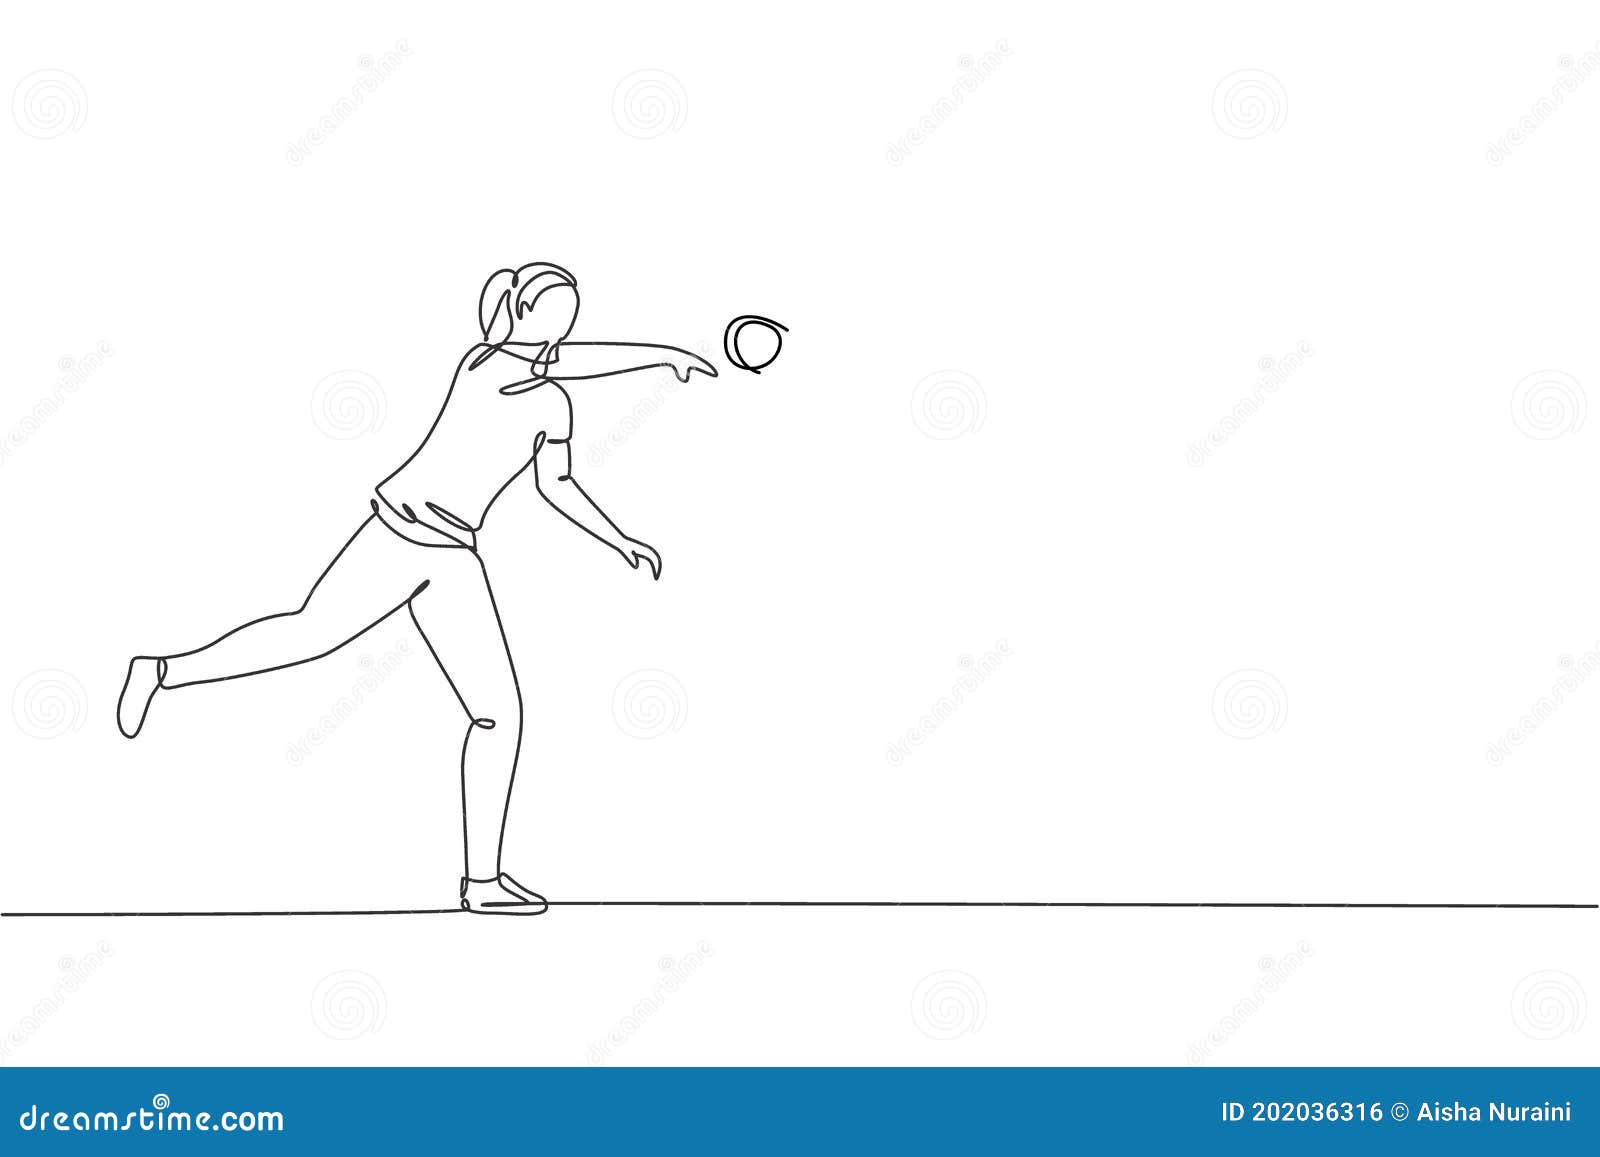 single continuous line drawing young sportive woman practice to powerfully throw shot put court stadium athletic games 202036316